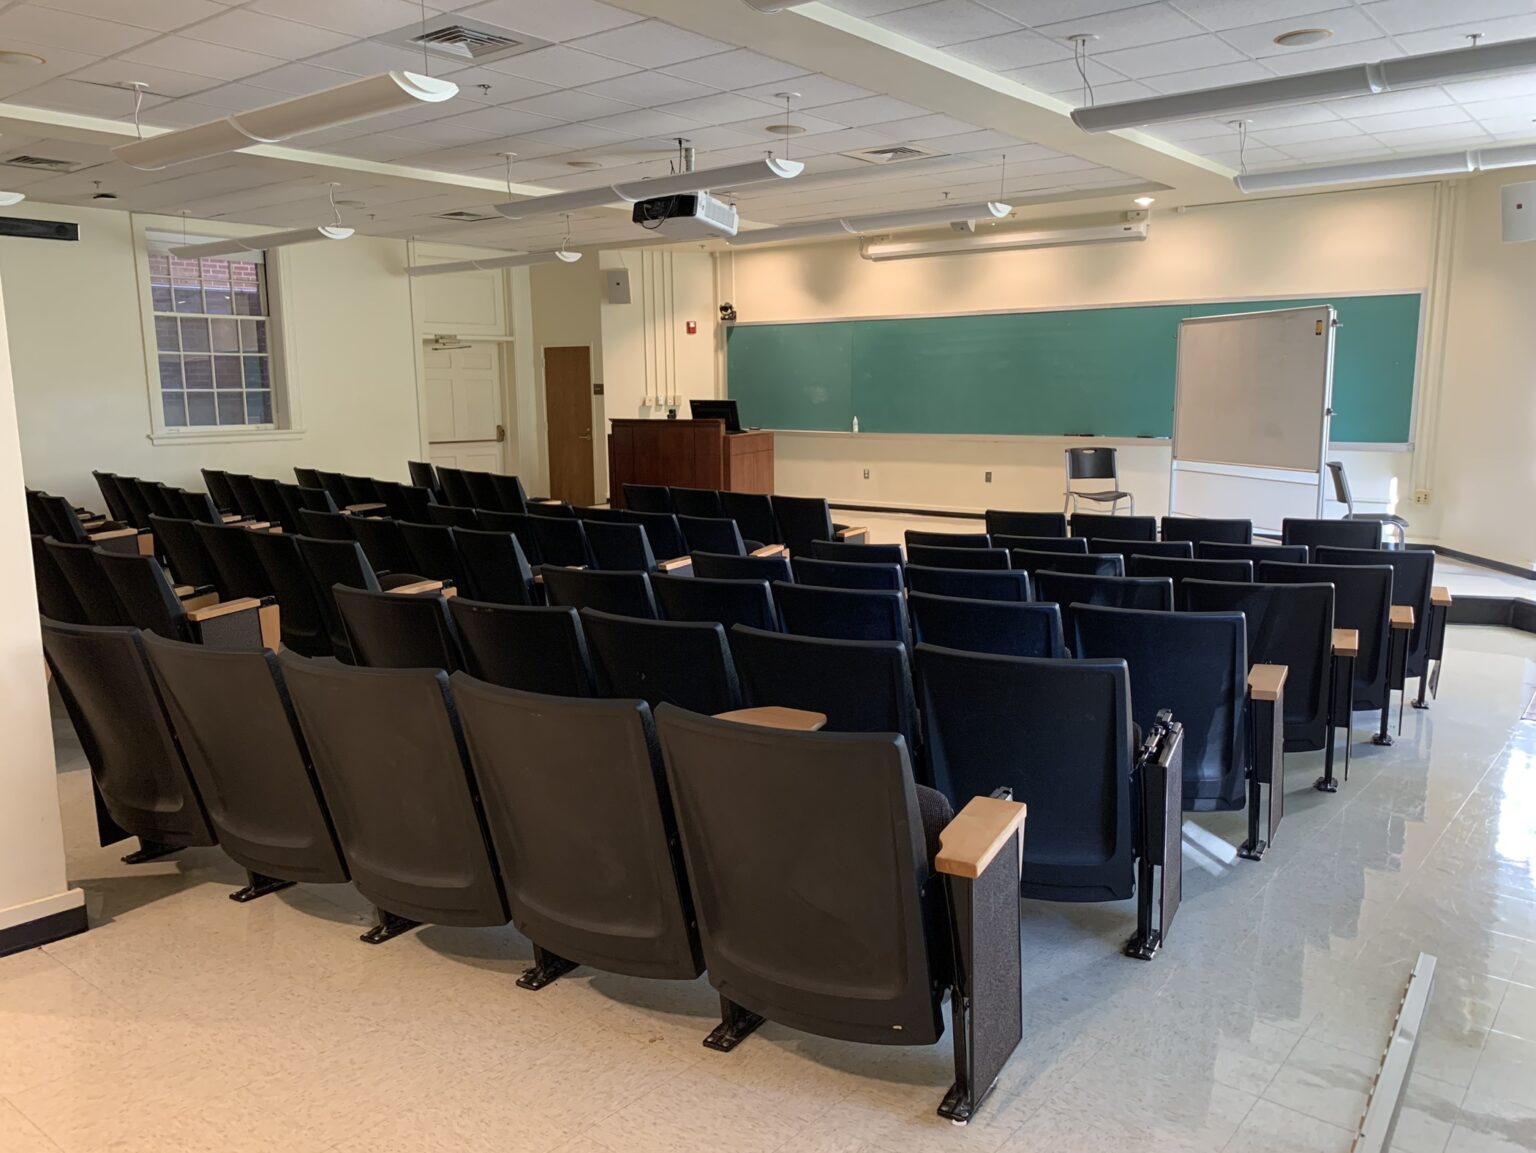 Interior of a seminar room with rows of chairs facing a blackboard.